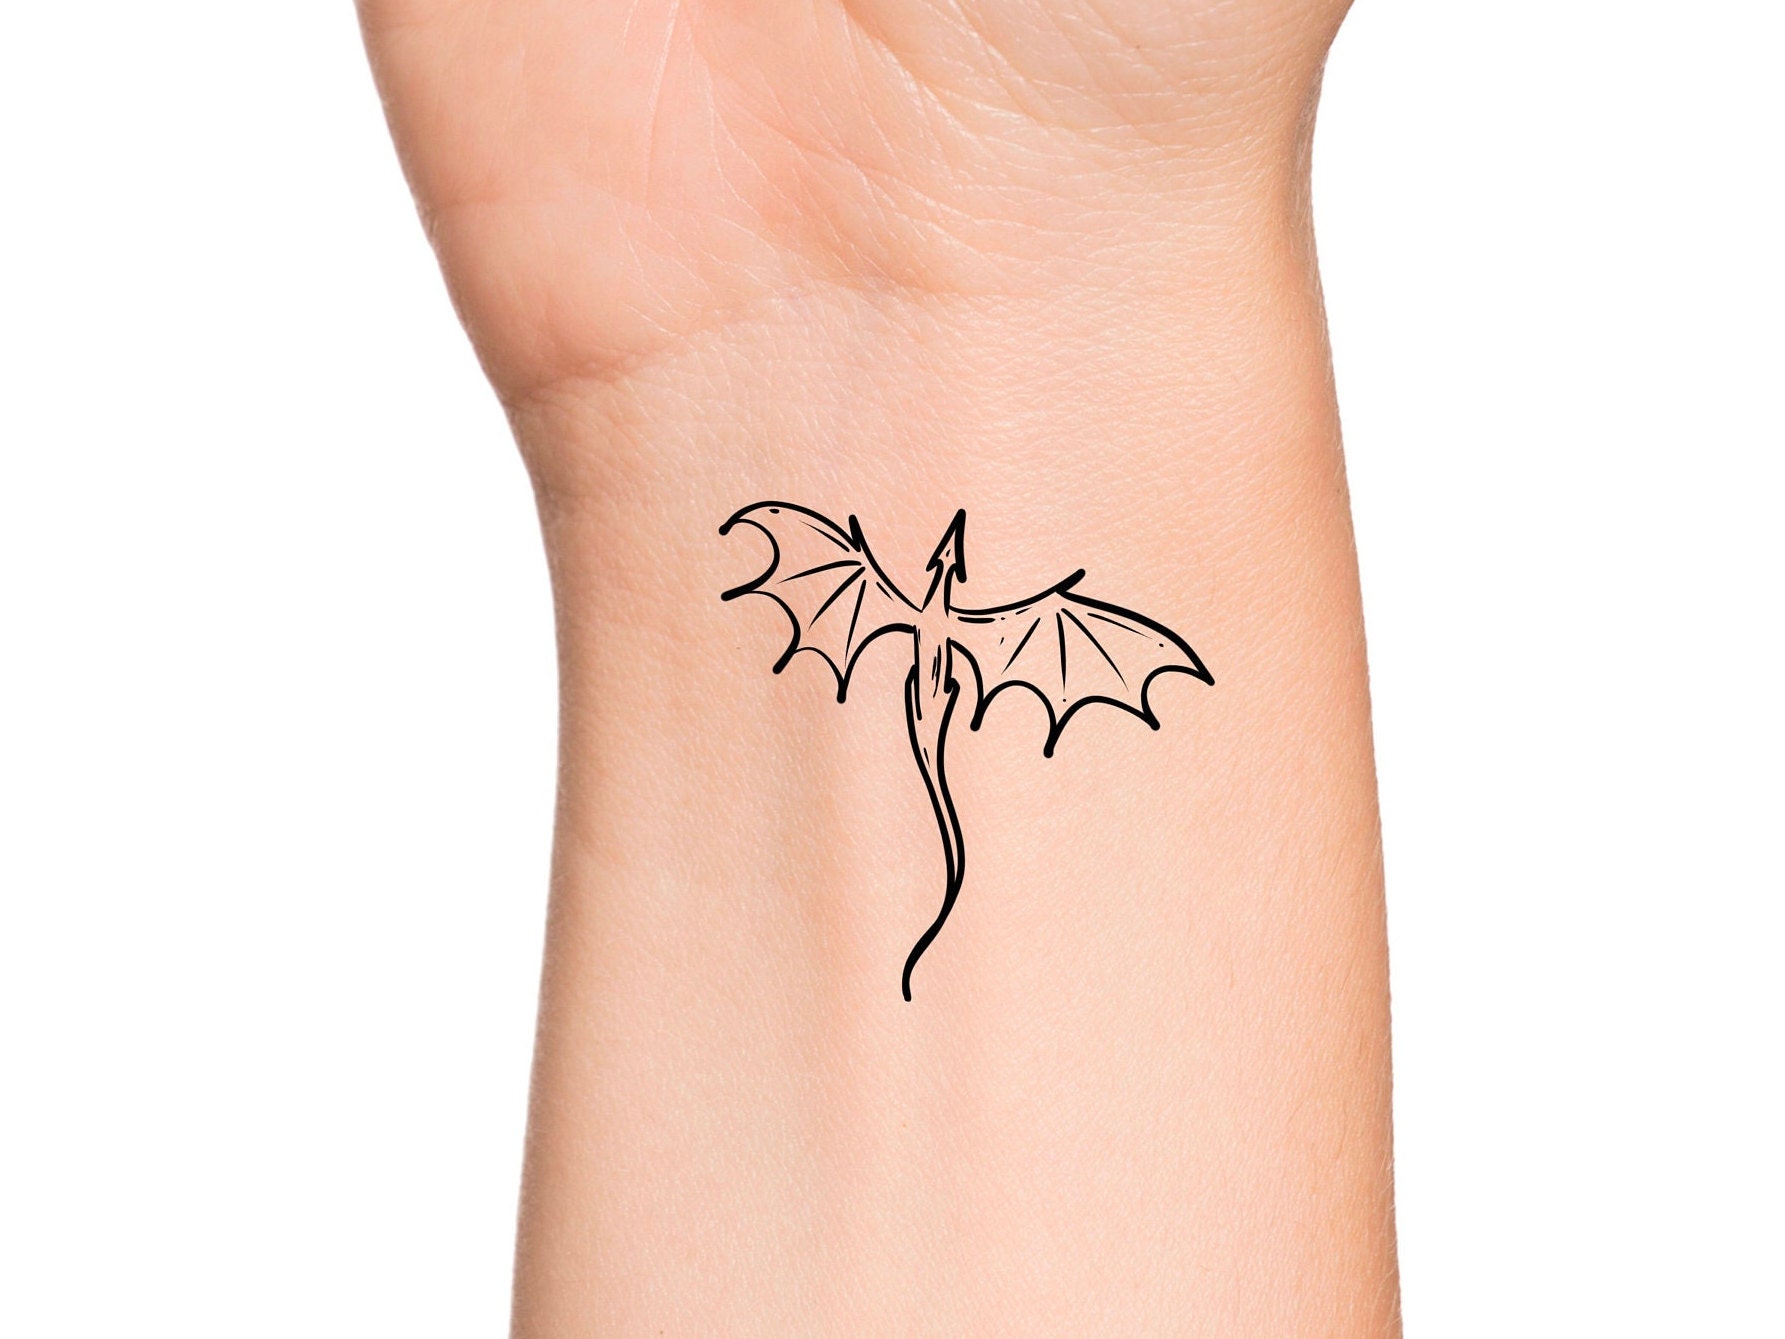 Supperb Lower Back Shoulder Neck Arm Temporary Tattoos  Small Dragons   Amazonin Beauty